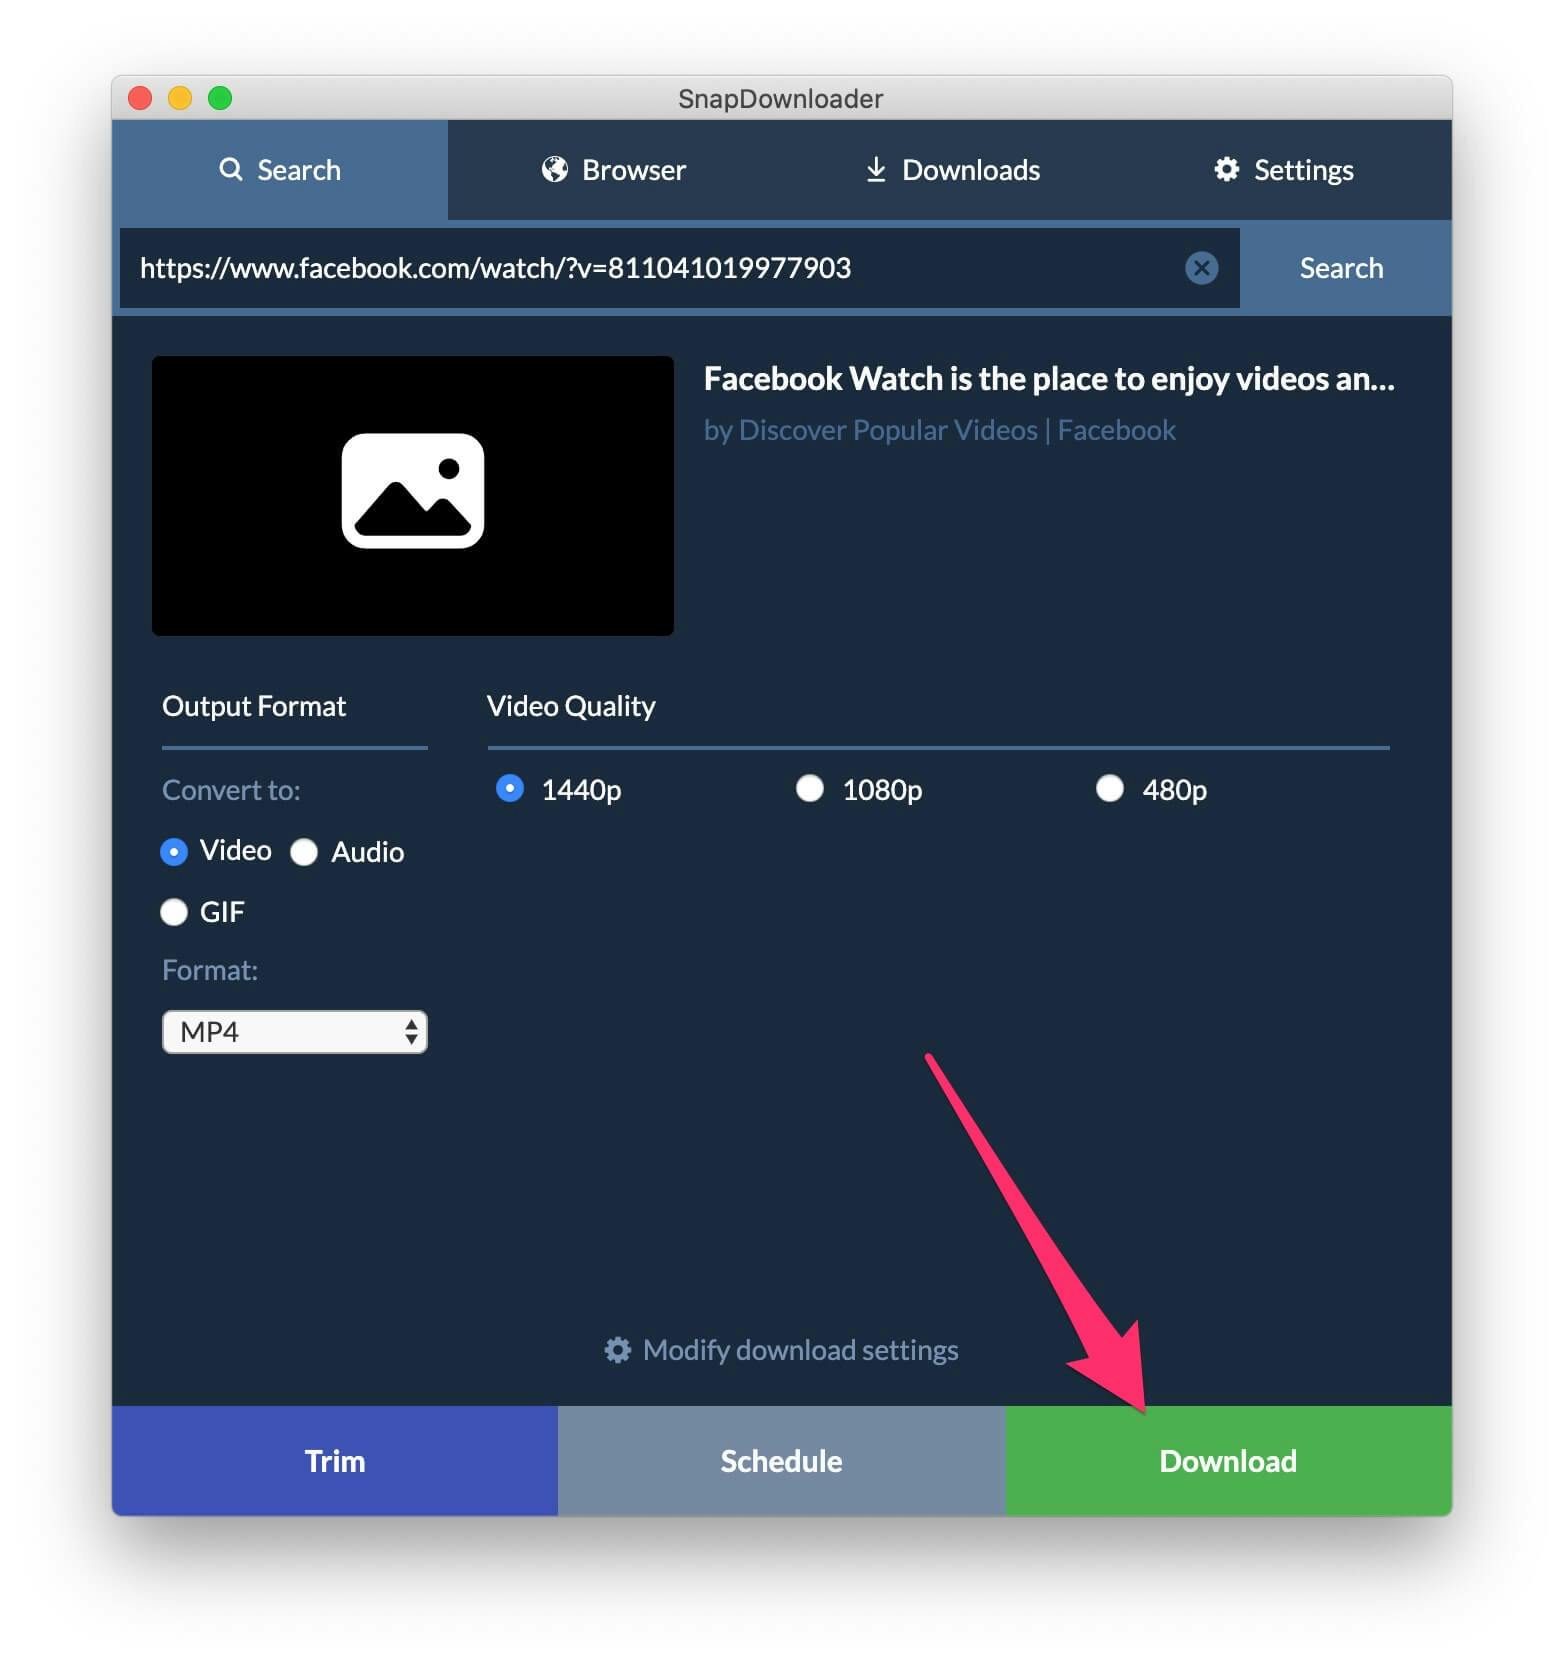 click Download to begin saving the private Facebook video